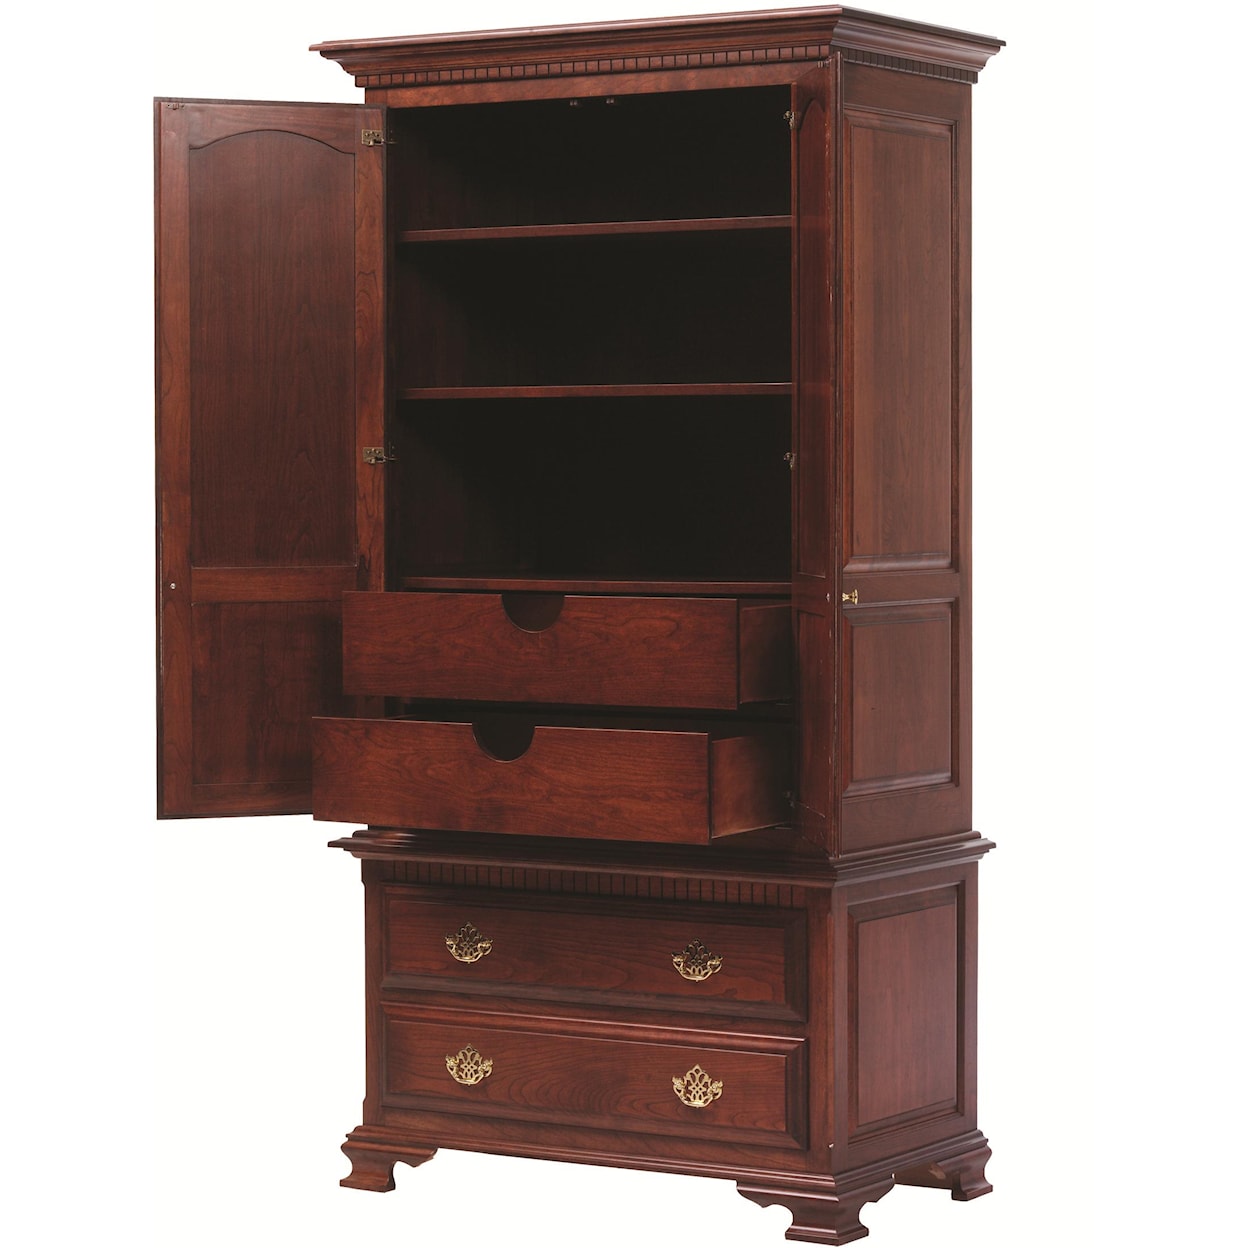 Millcraft Victorias Tradition Armoire